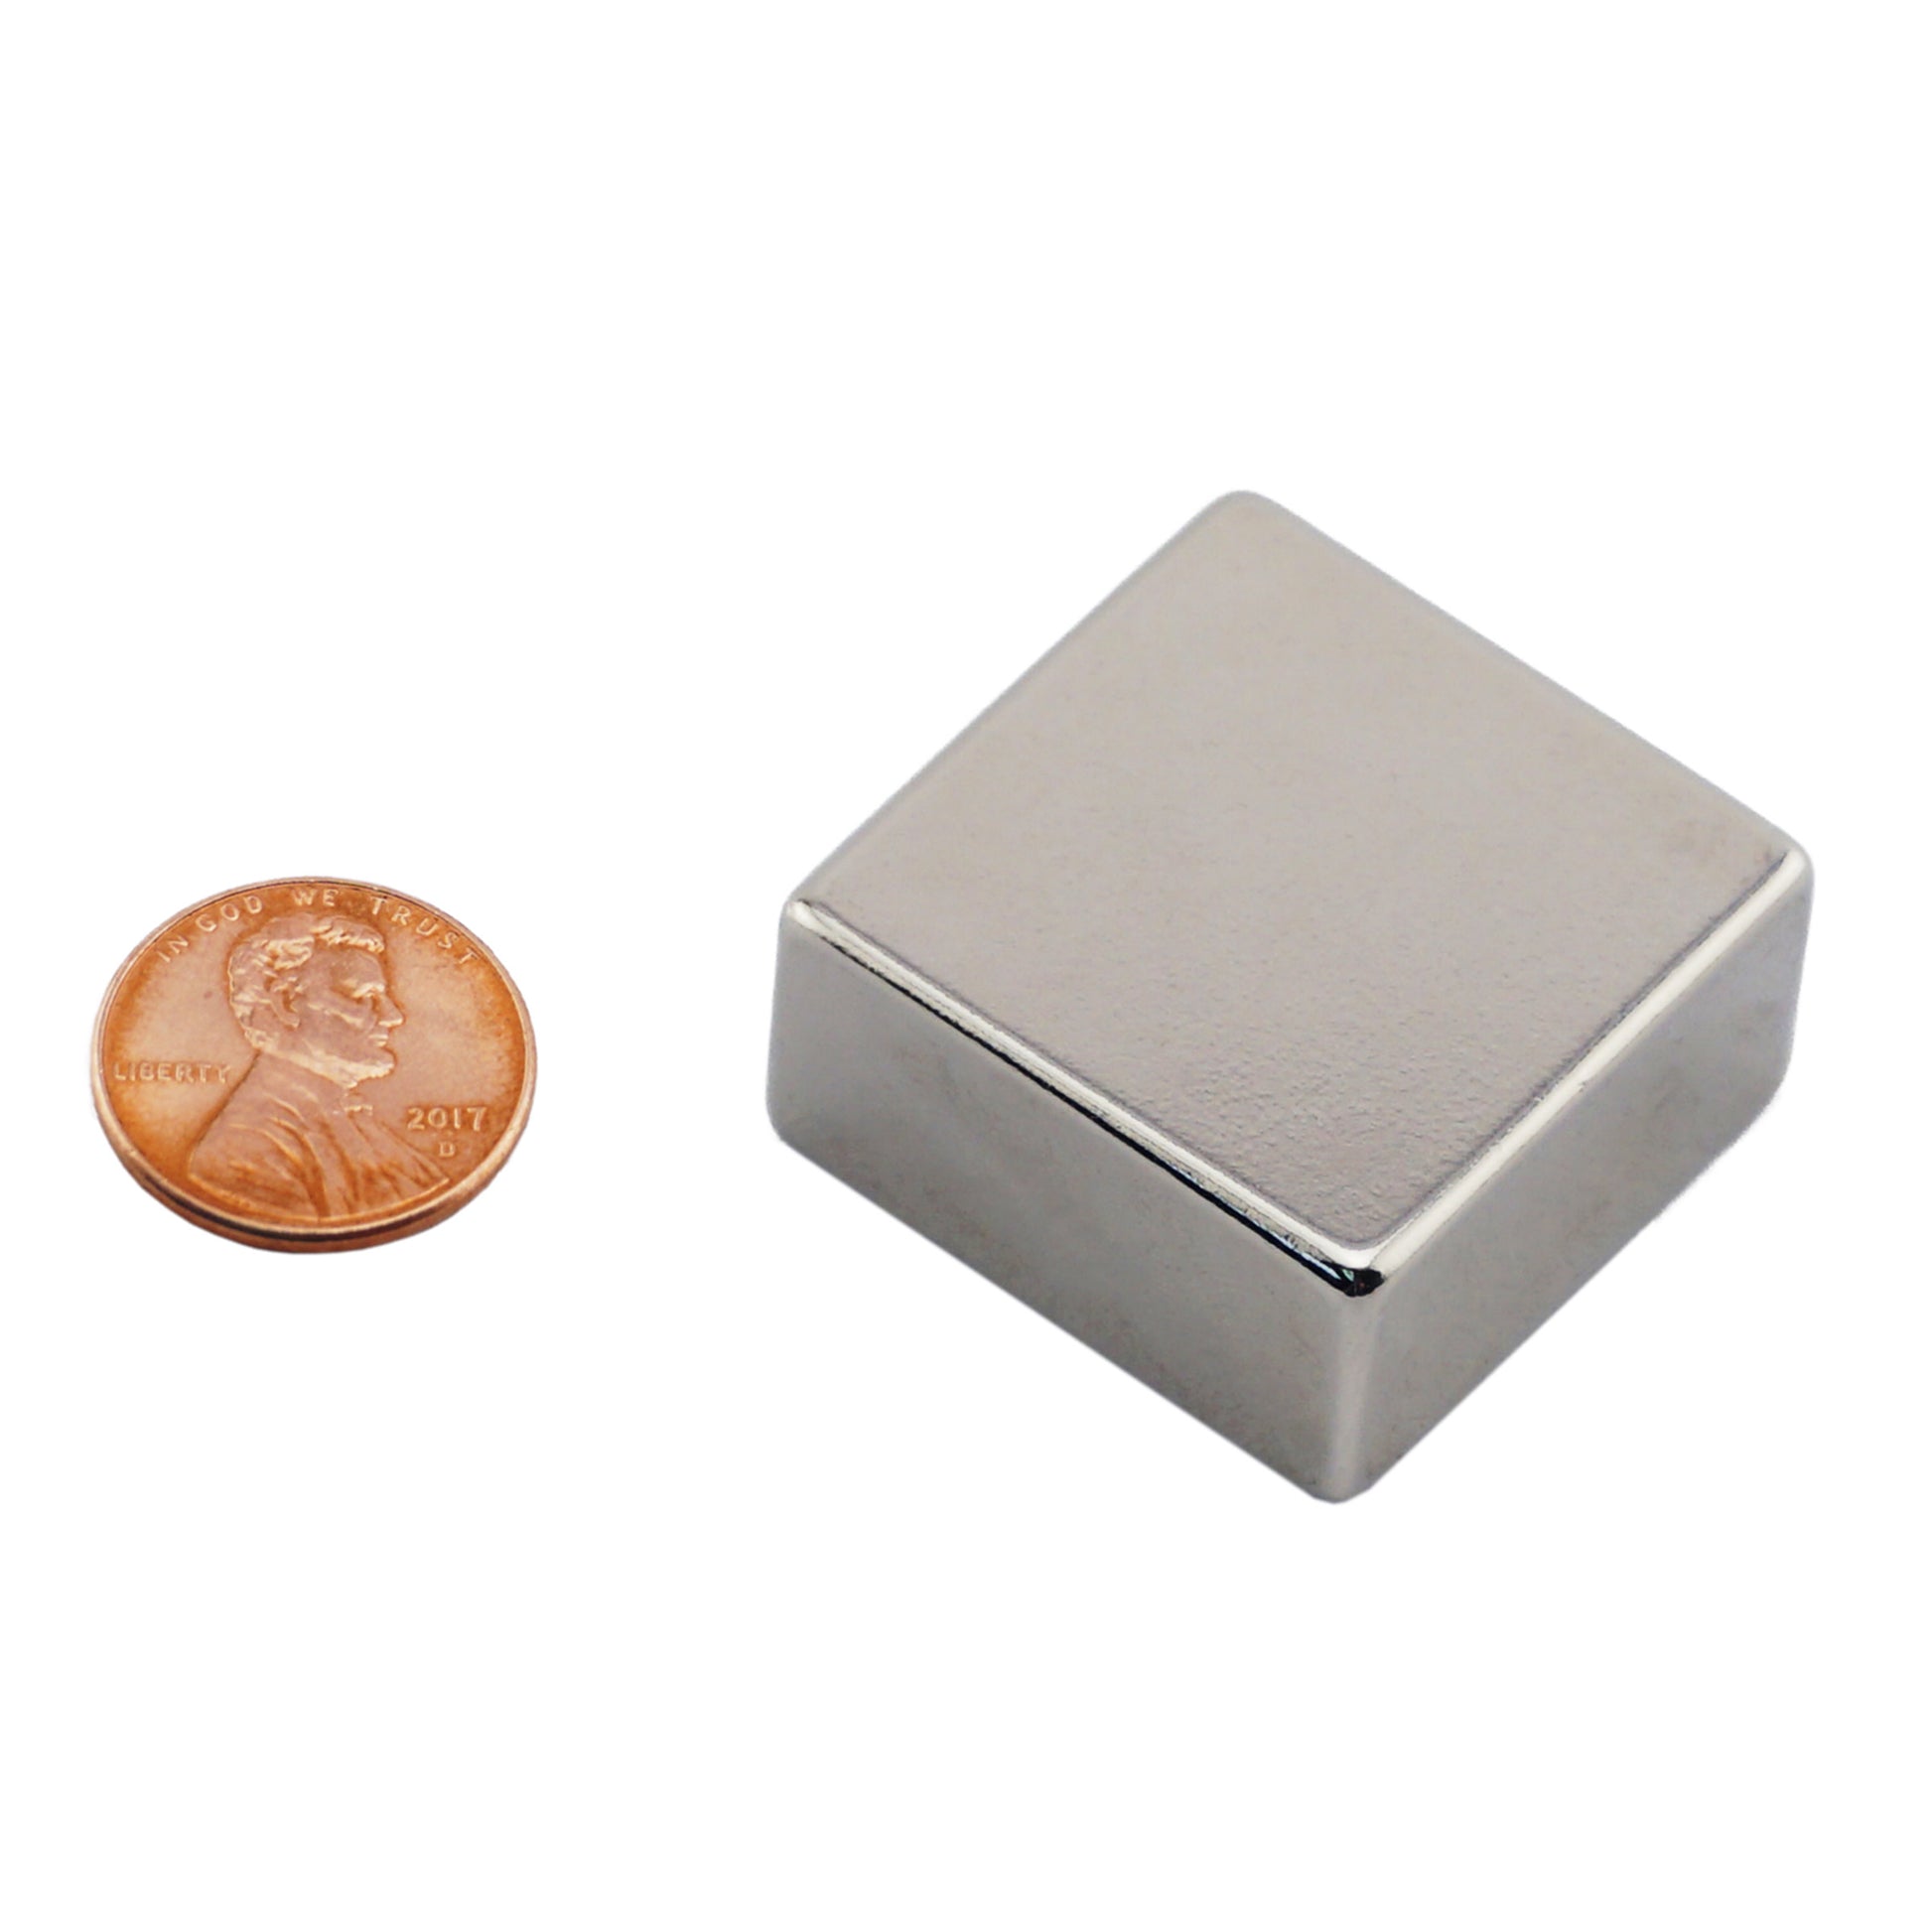 Load image into Gallery viewer, NB005029N Neodymium Block Magnet - Compared to Penny for Size Reference